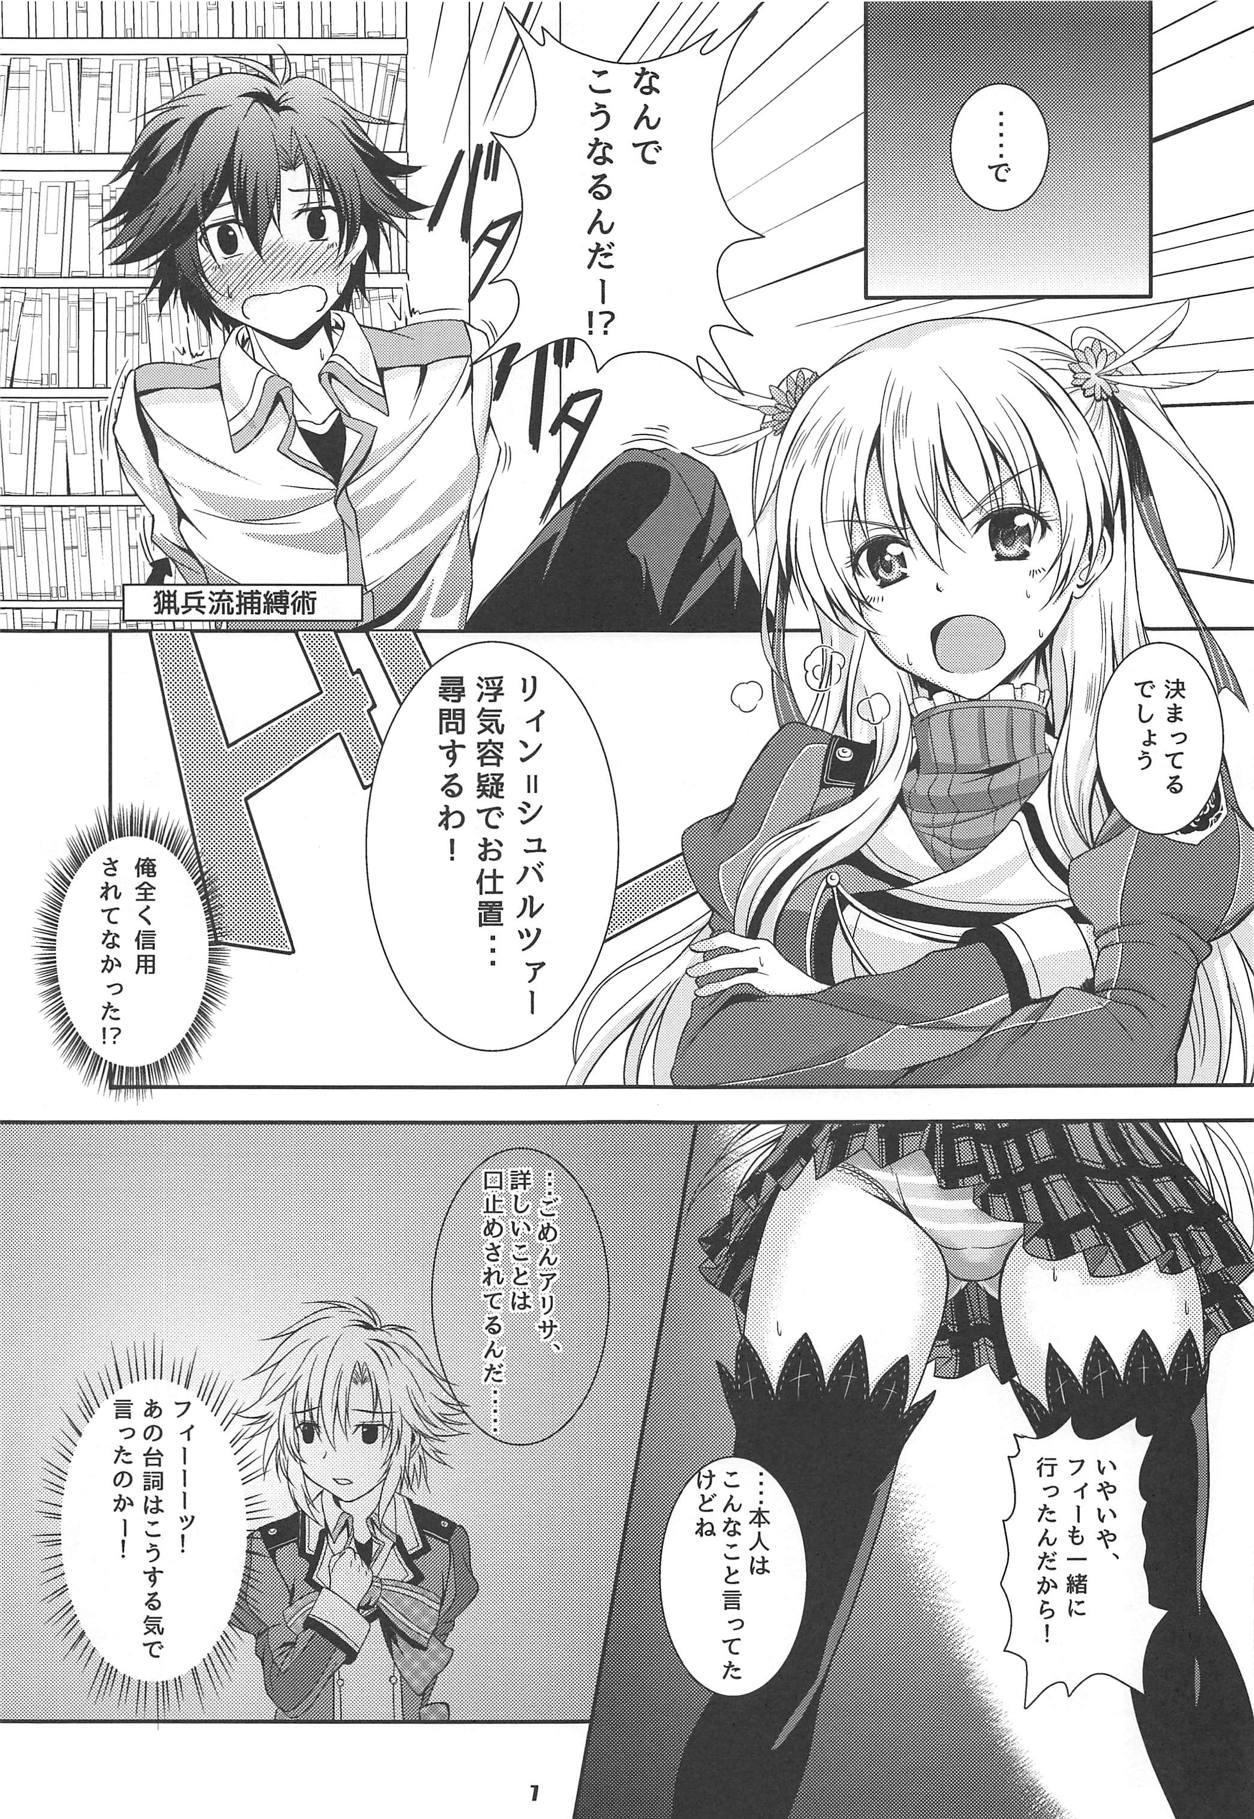 Blondes RF Private Room no Ichiban Amai Yoru - The legend of heroes Fingers - Page 6